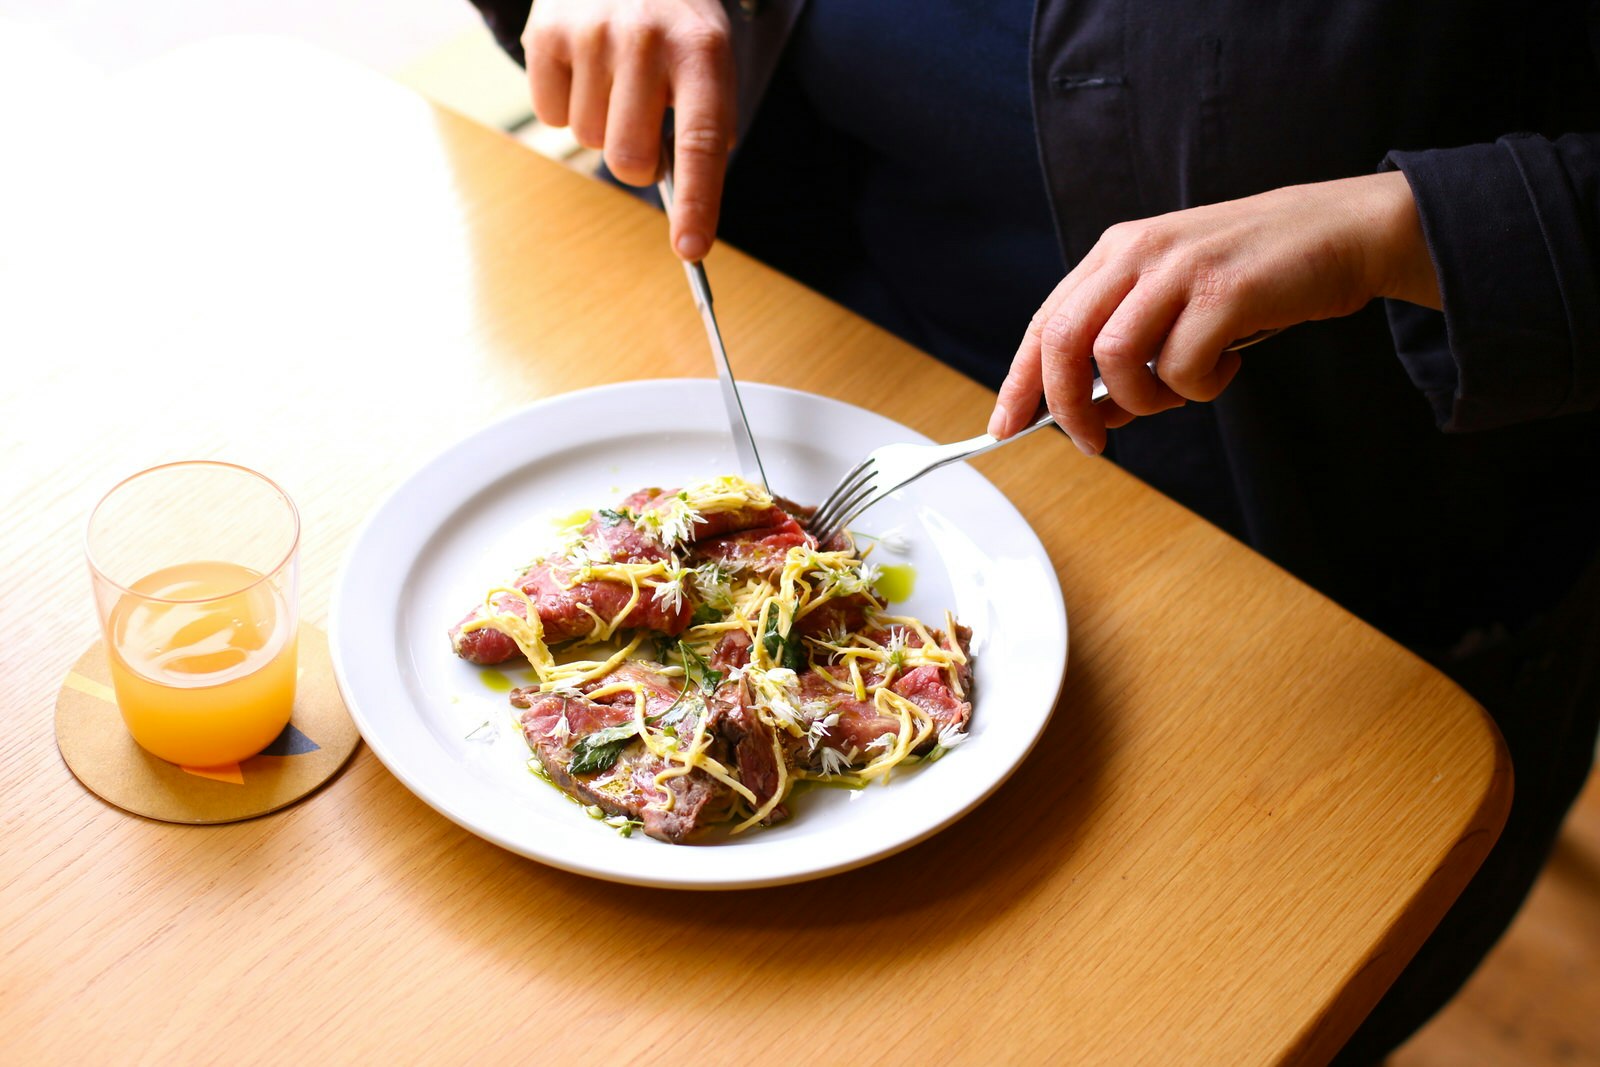 A shot of rare red meat sprinkled with oil, edible flowers and slaw. The meat is being cut by someone who is out of frame. 